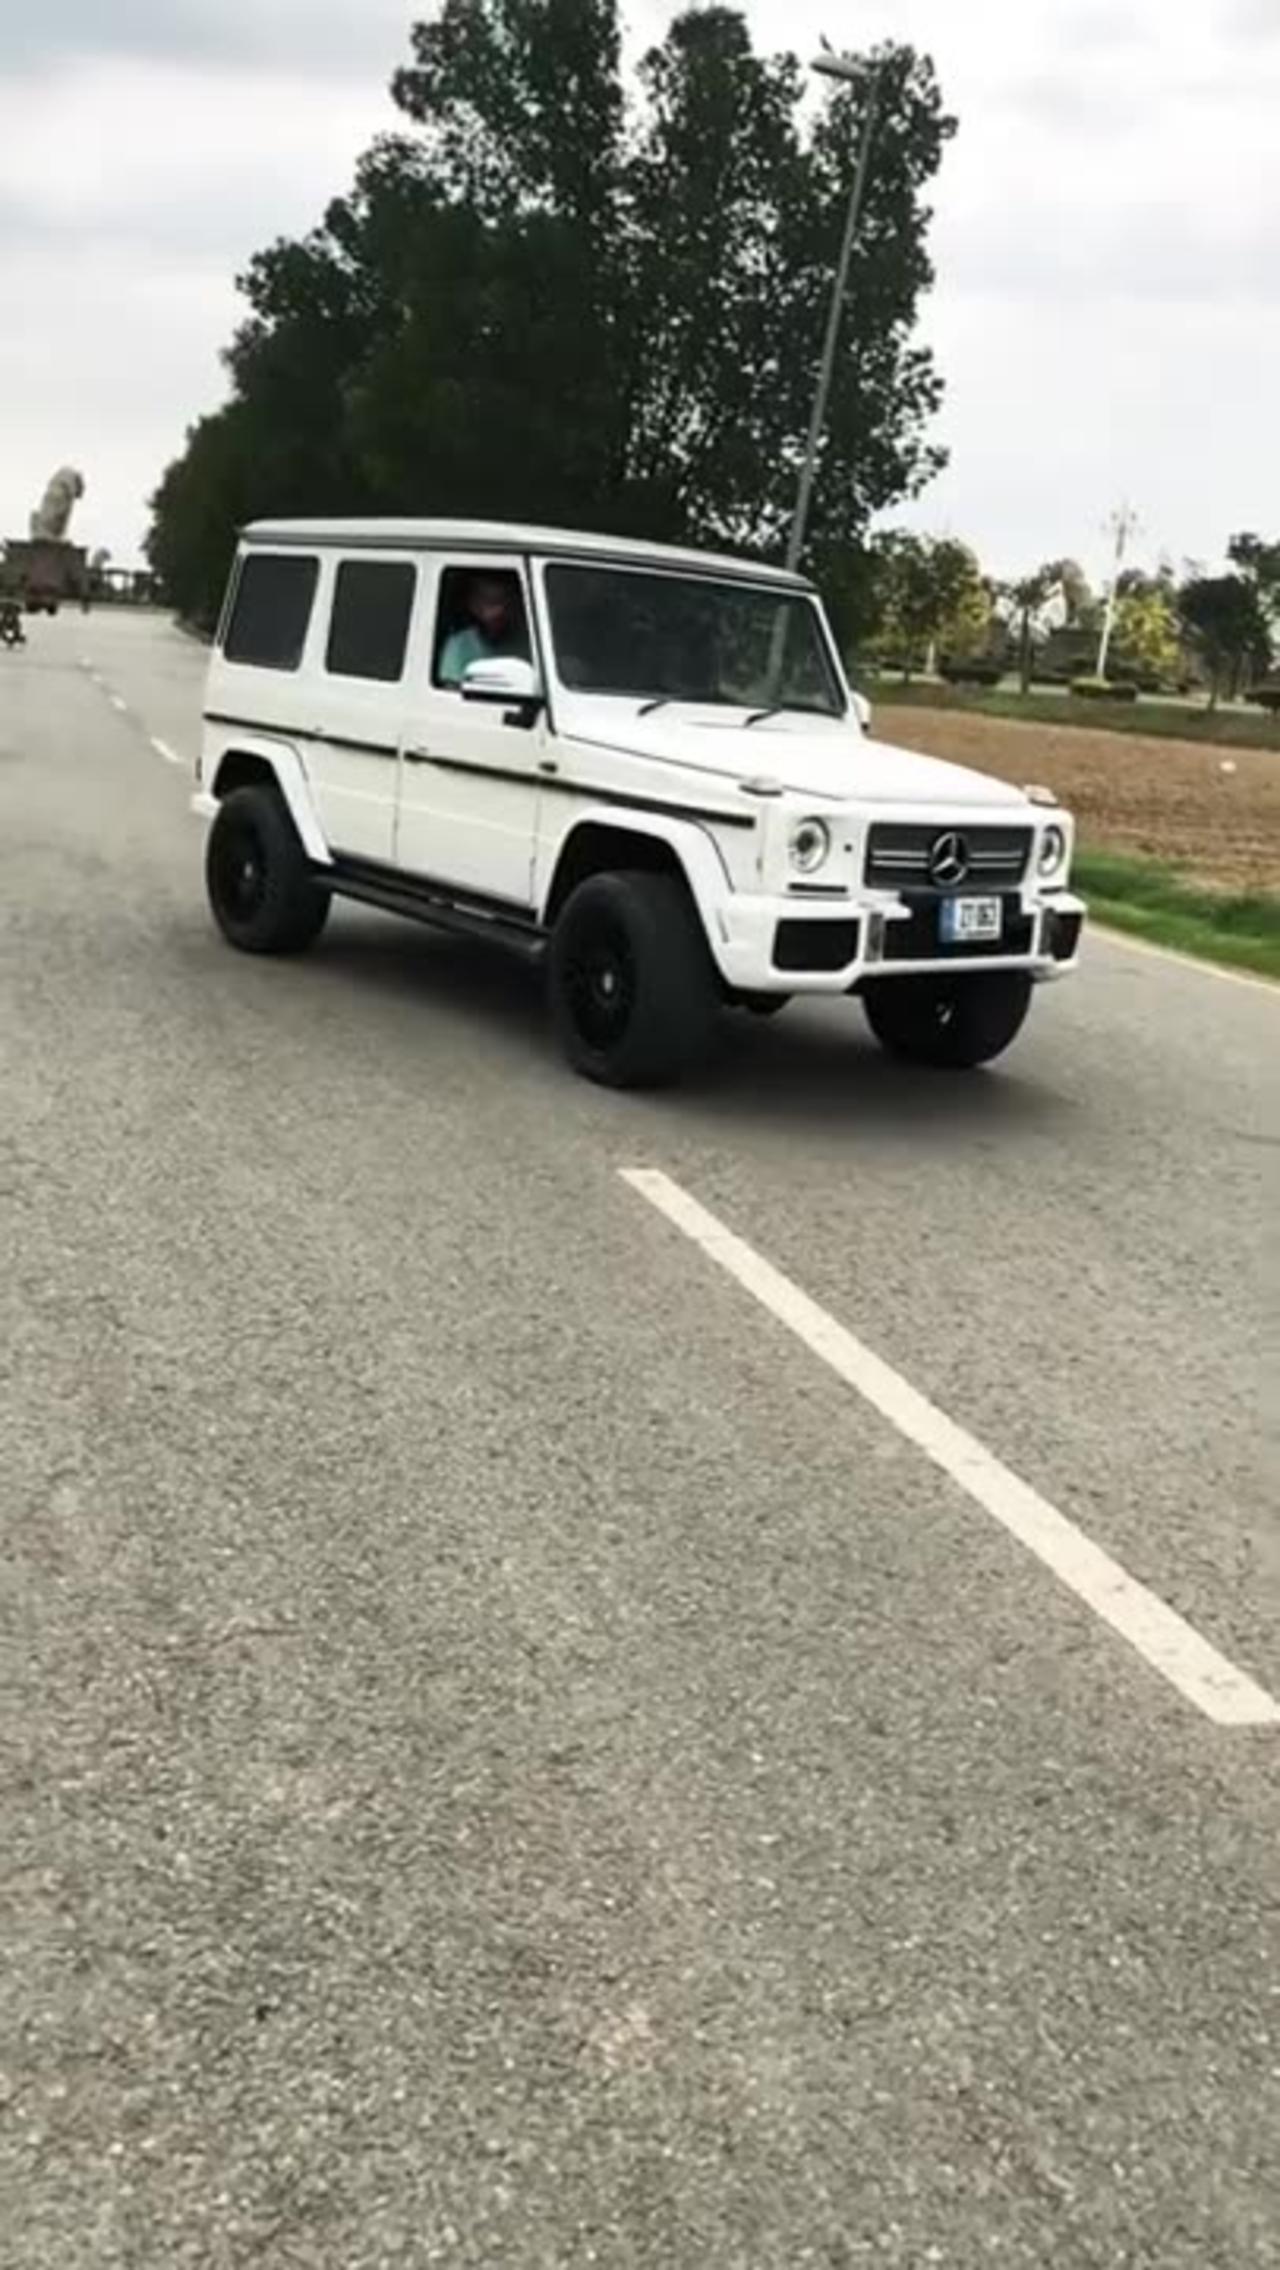 One and only gwagon in my city